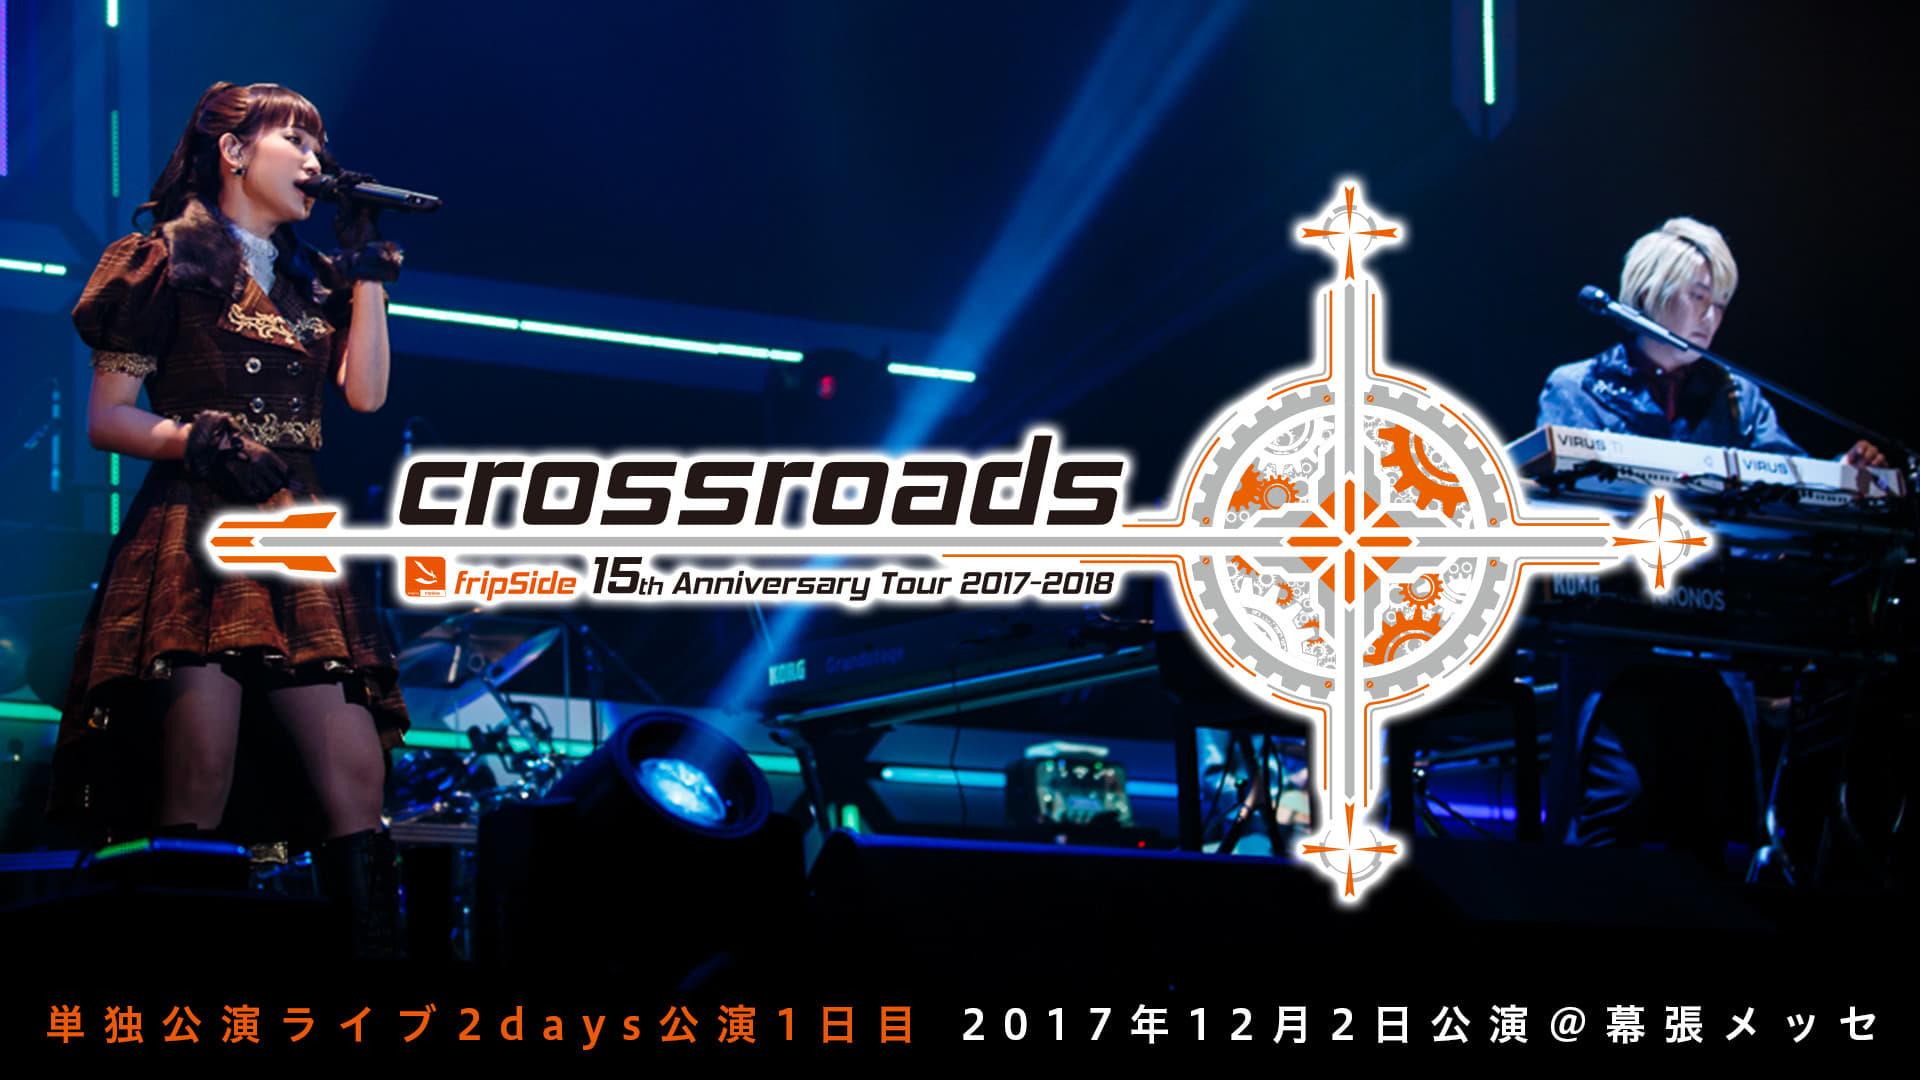 fripSide 15th Anniversary Tour 2017-2018 “crossroads” Day 1 backdrop